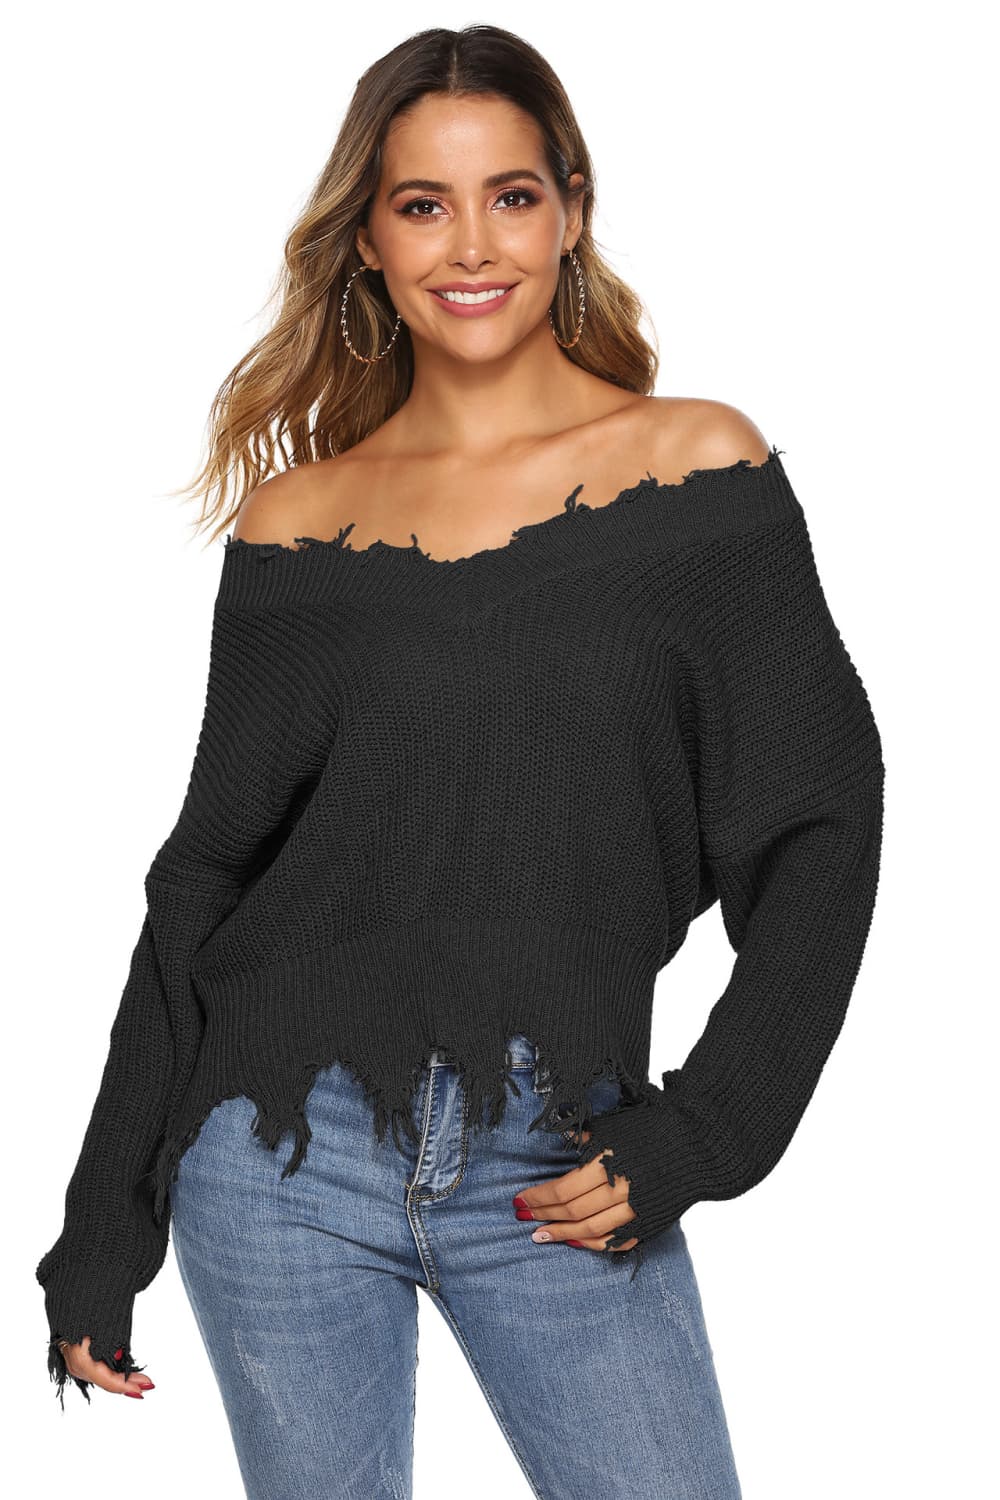 Get trendy with Off-Shoulder Ribbed Long Sleeve Raw Hem Sweater - Sweater available at Styles Code. Grab yours today!